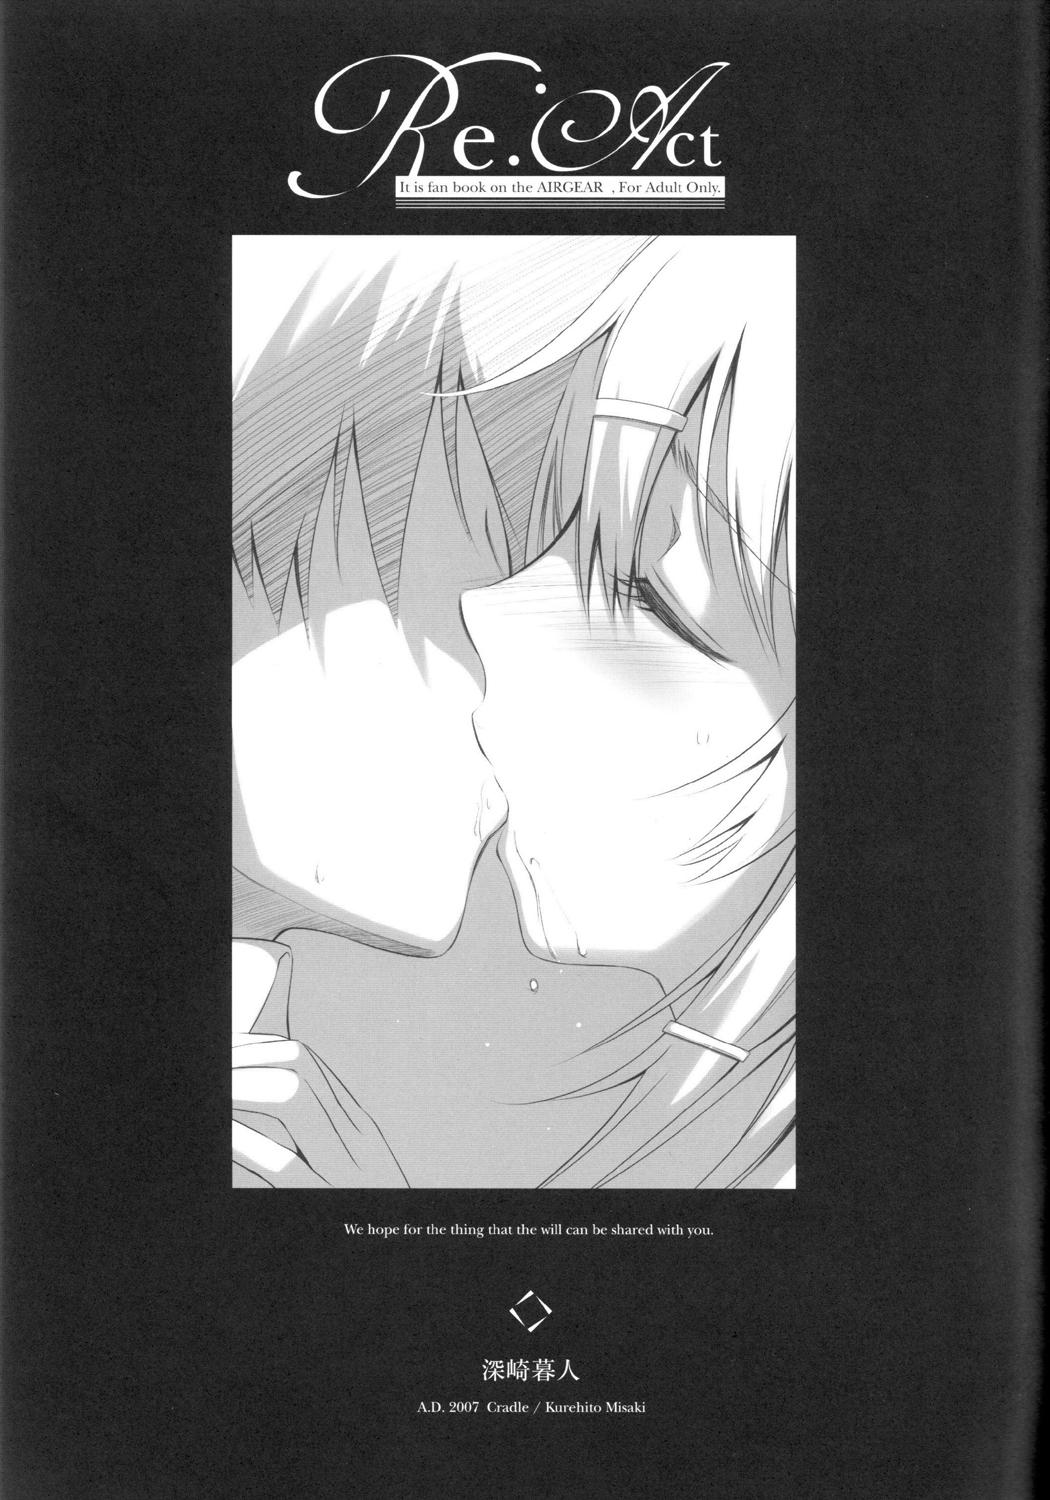 Roleplay Re:Act - Air gear Anal Sex - Page 4